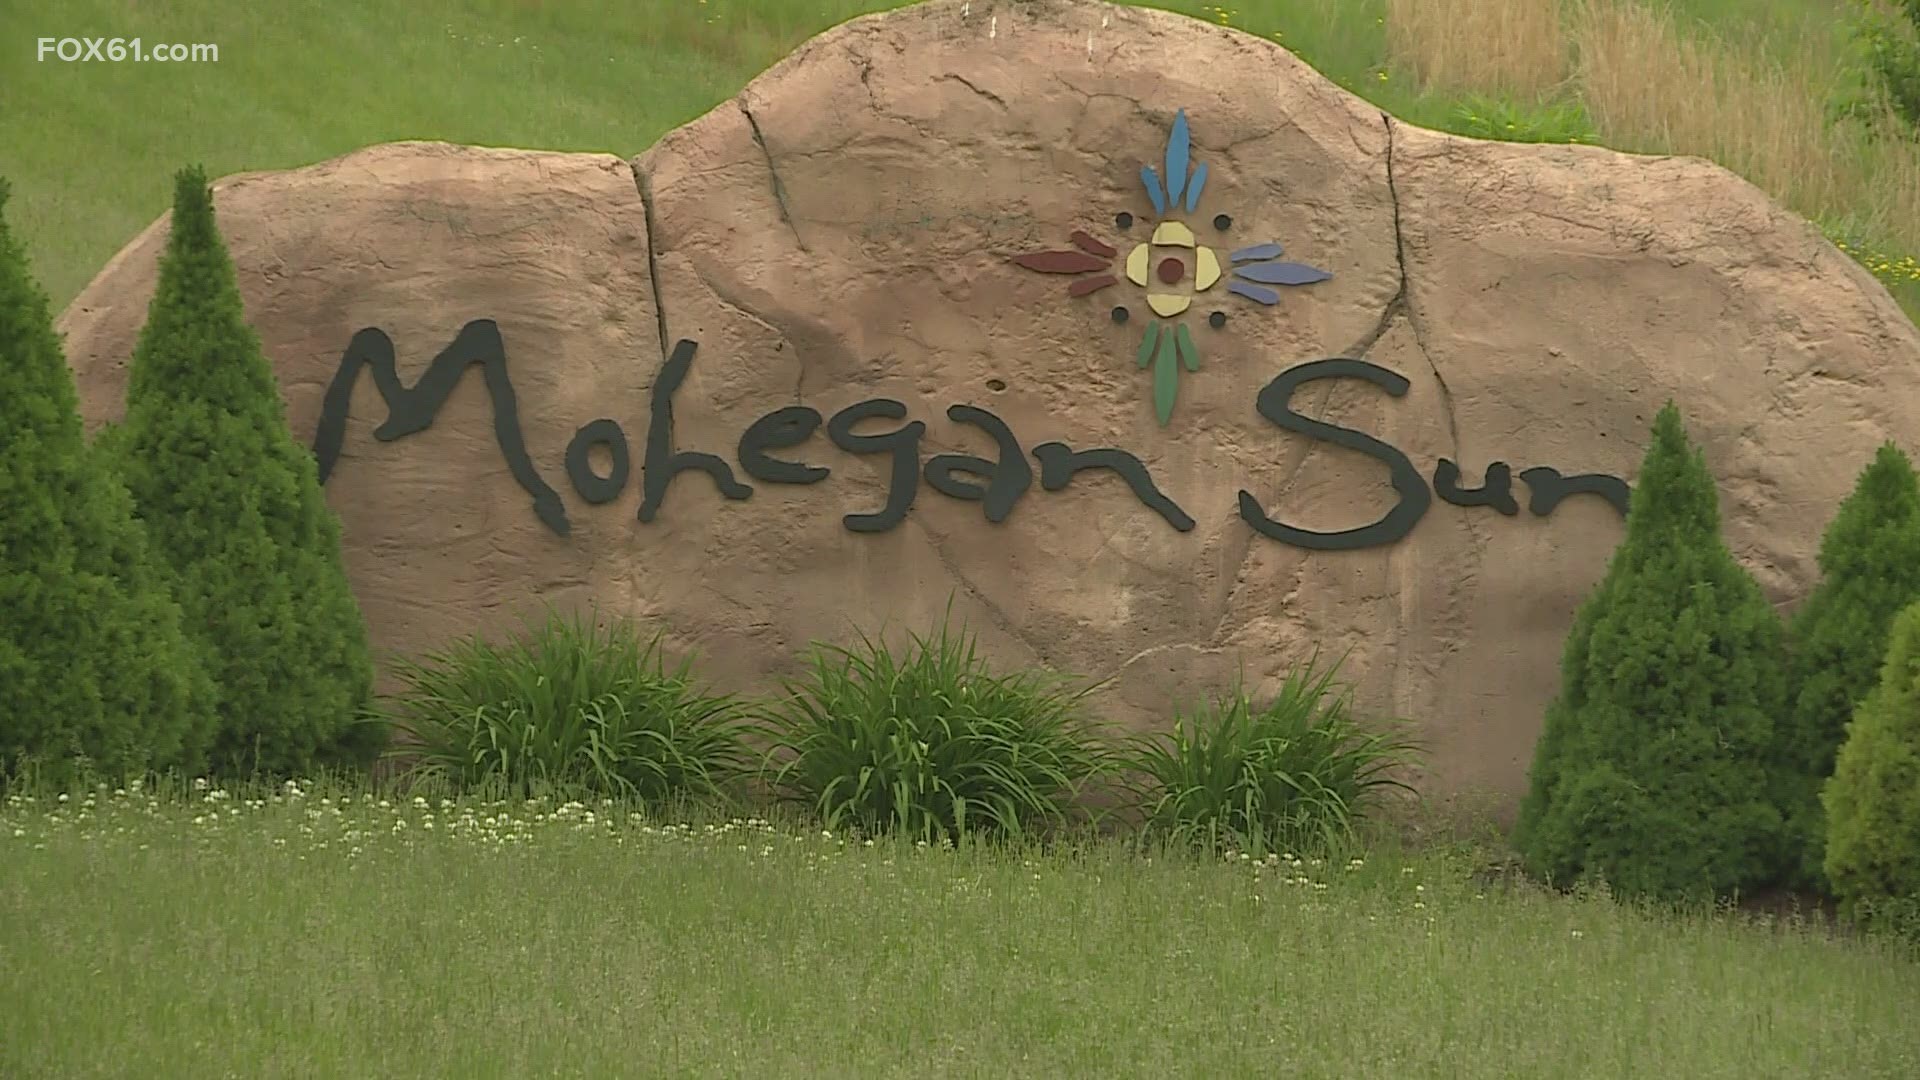 "The best thing we can do right now for each of those stakeholders is to focus foremost on the success of Mohegan Sun and Foxwoods," the Chairmen said in a release.